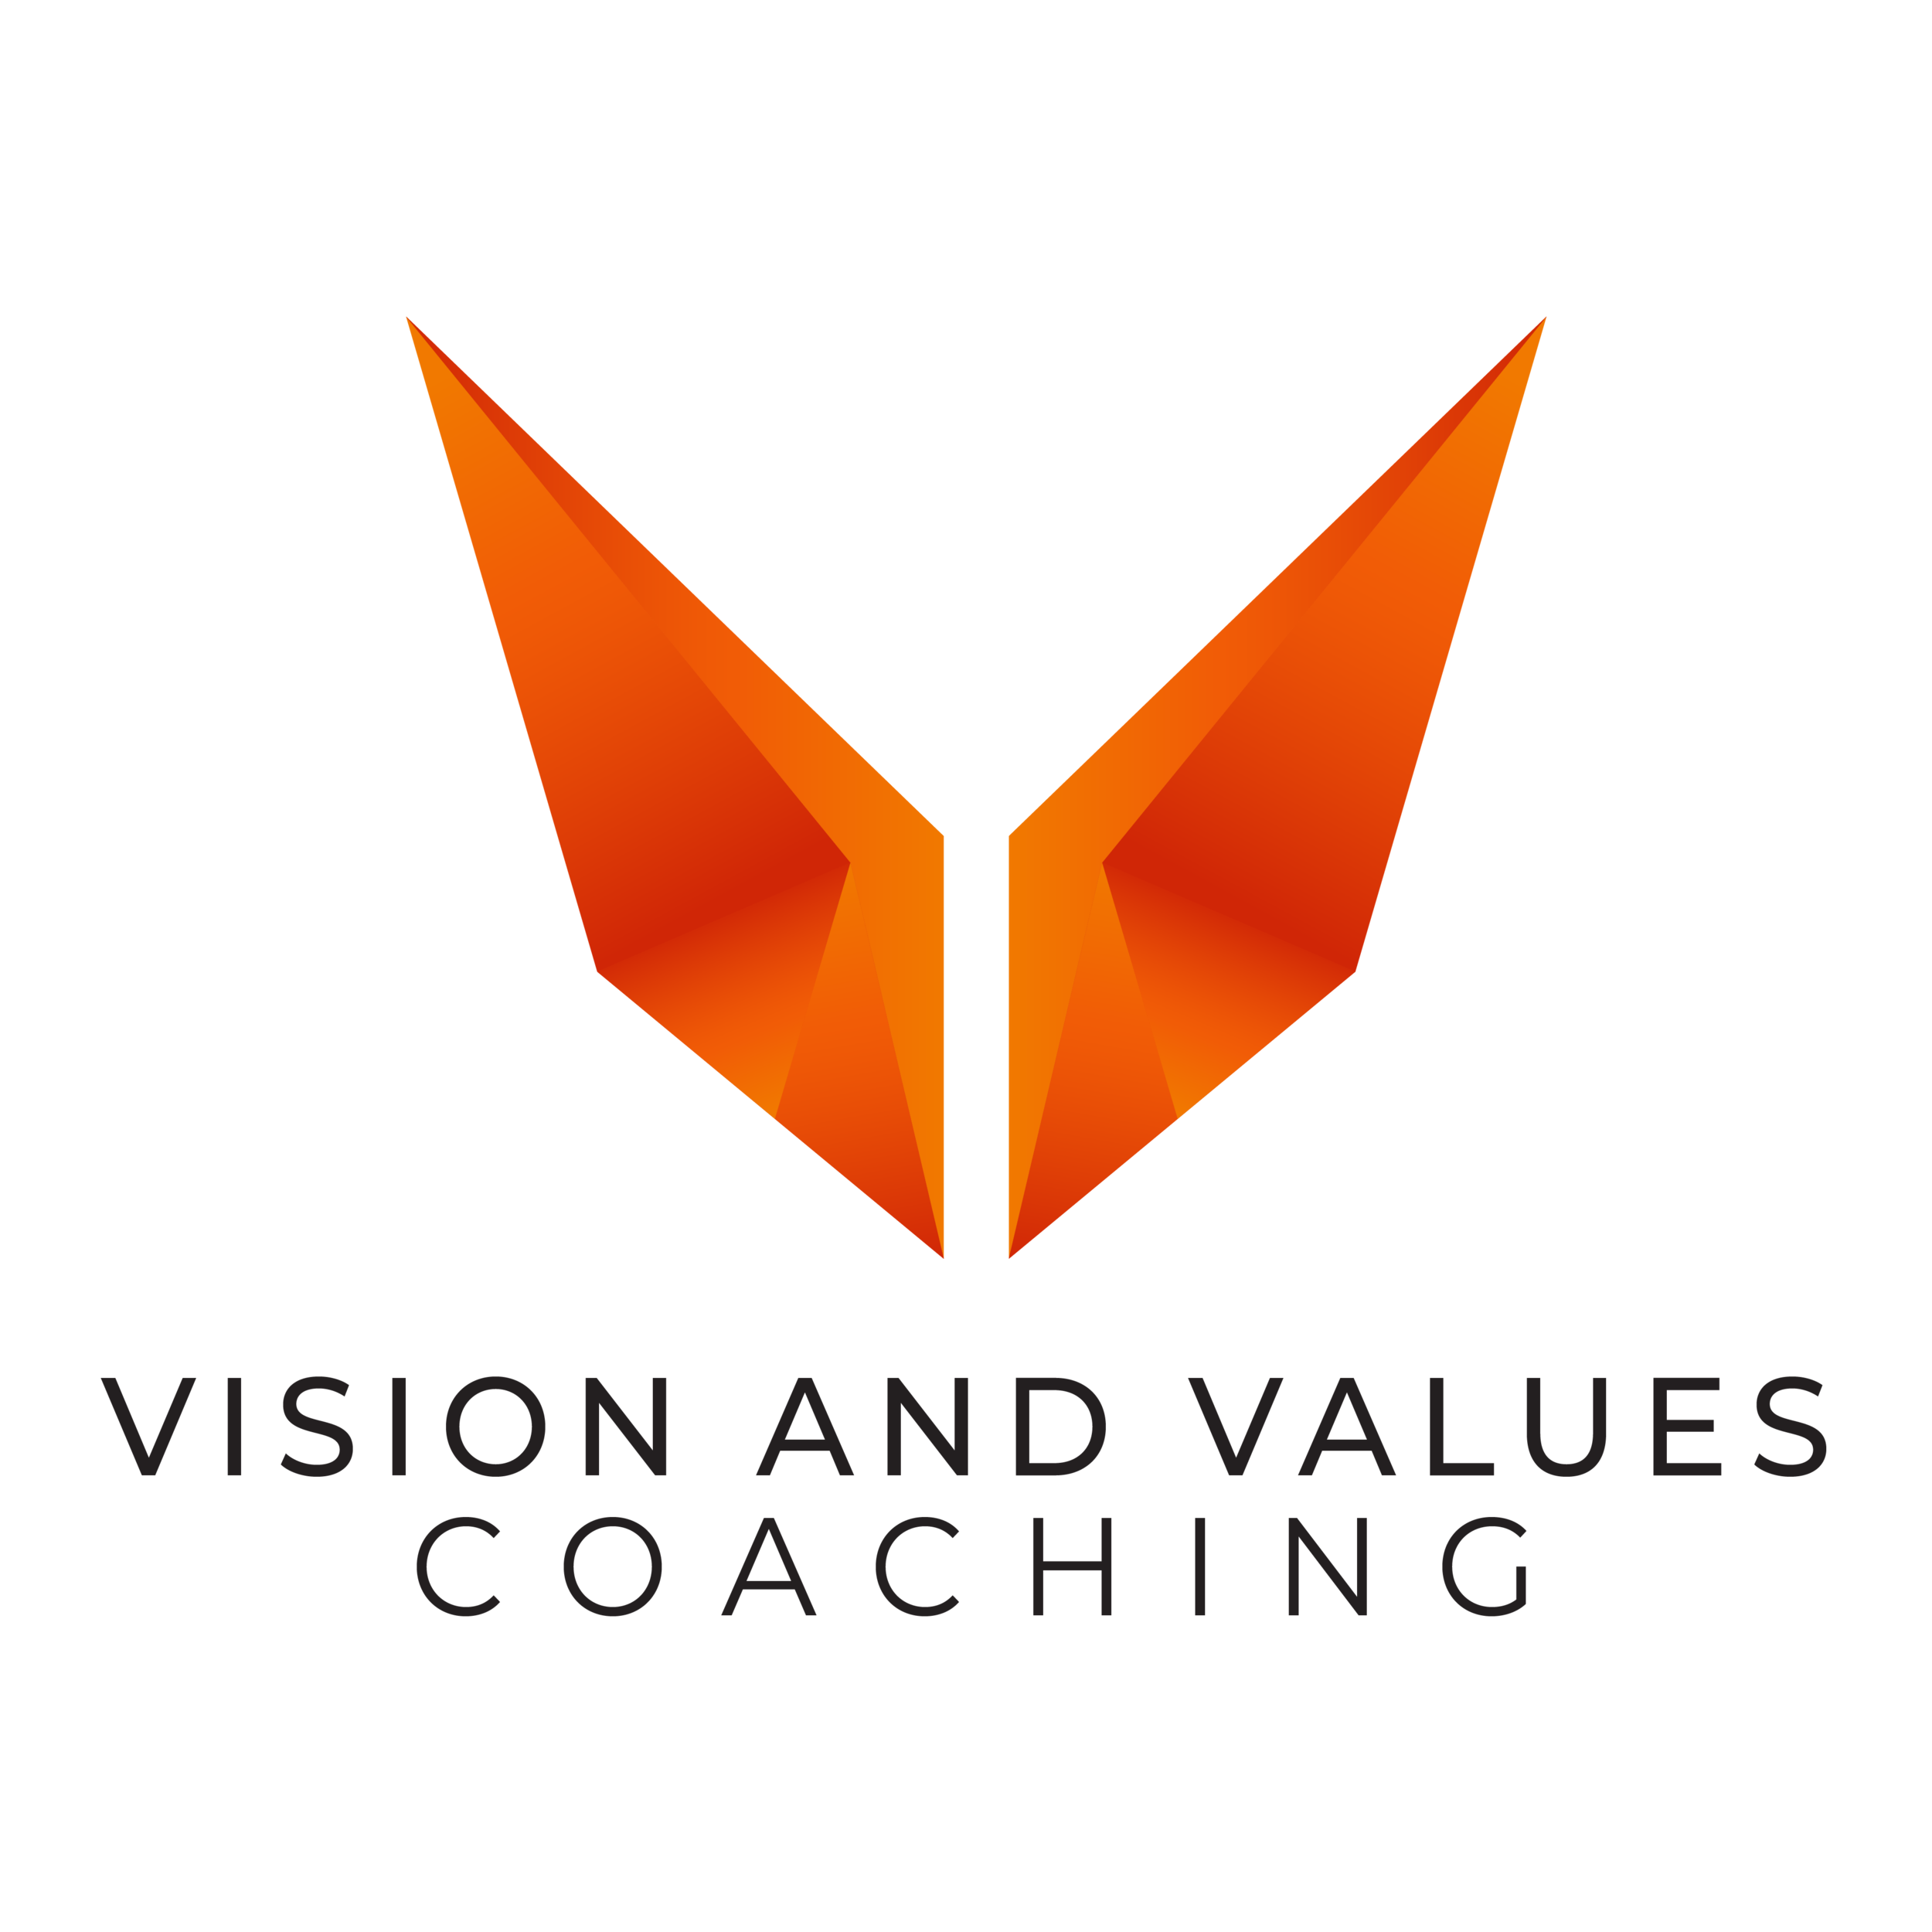 Vision and Values Coaching